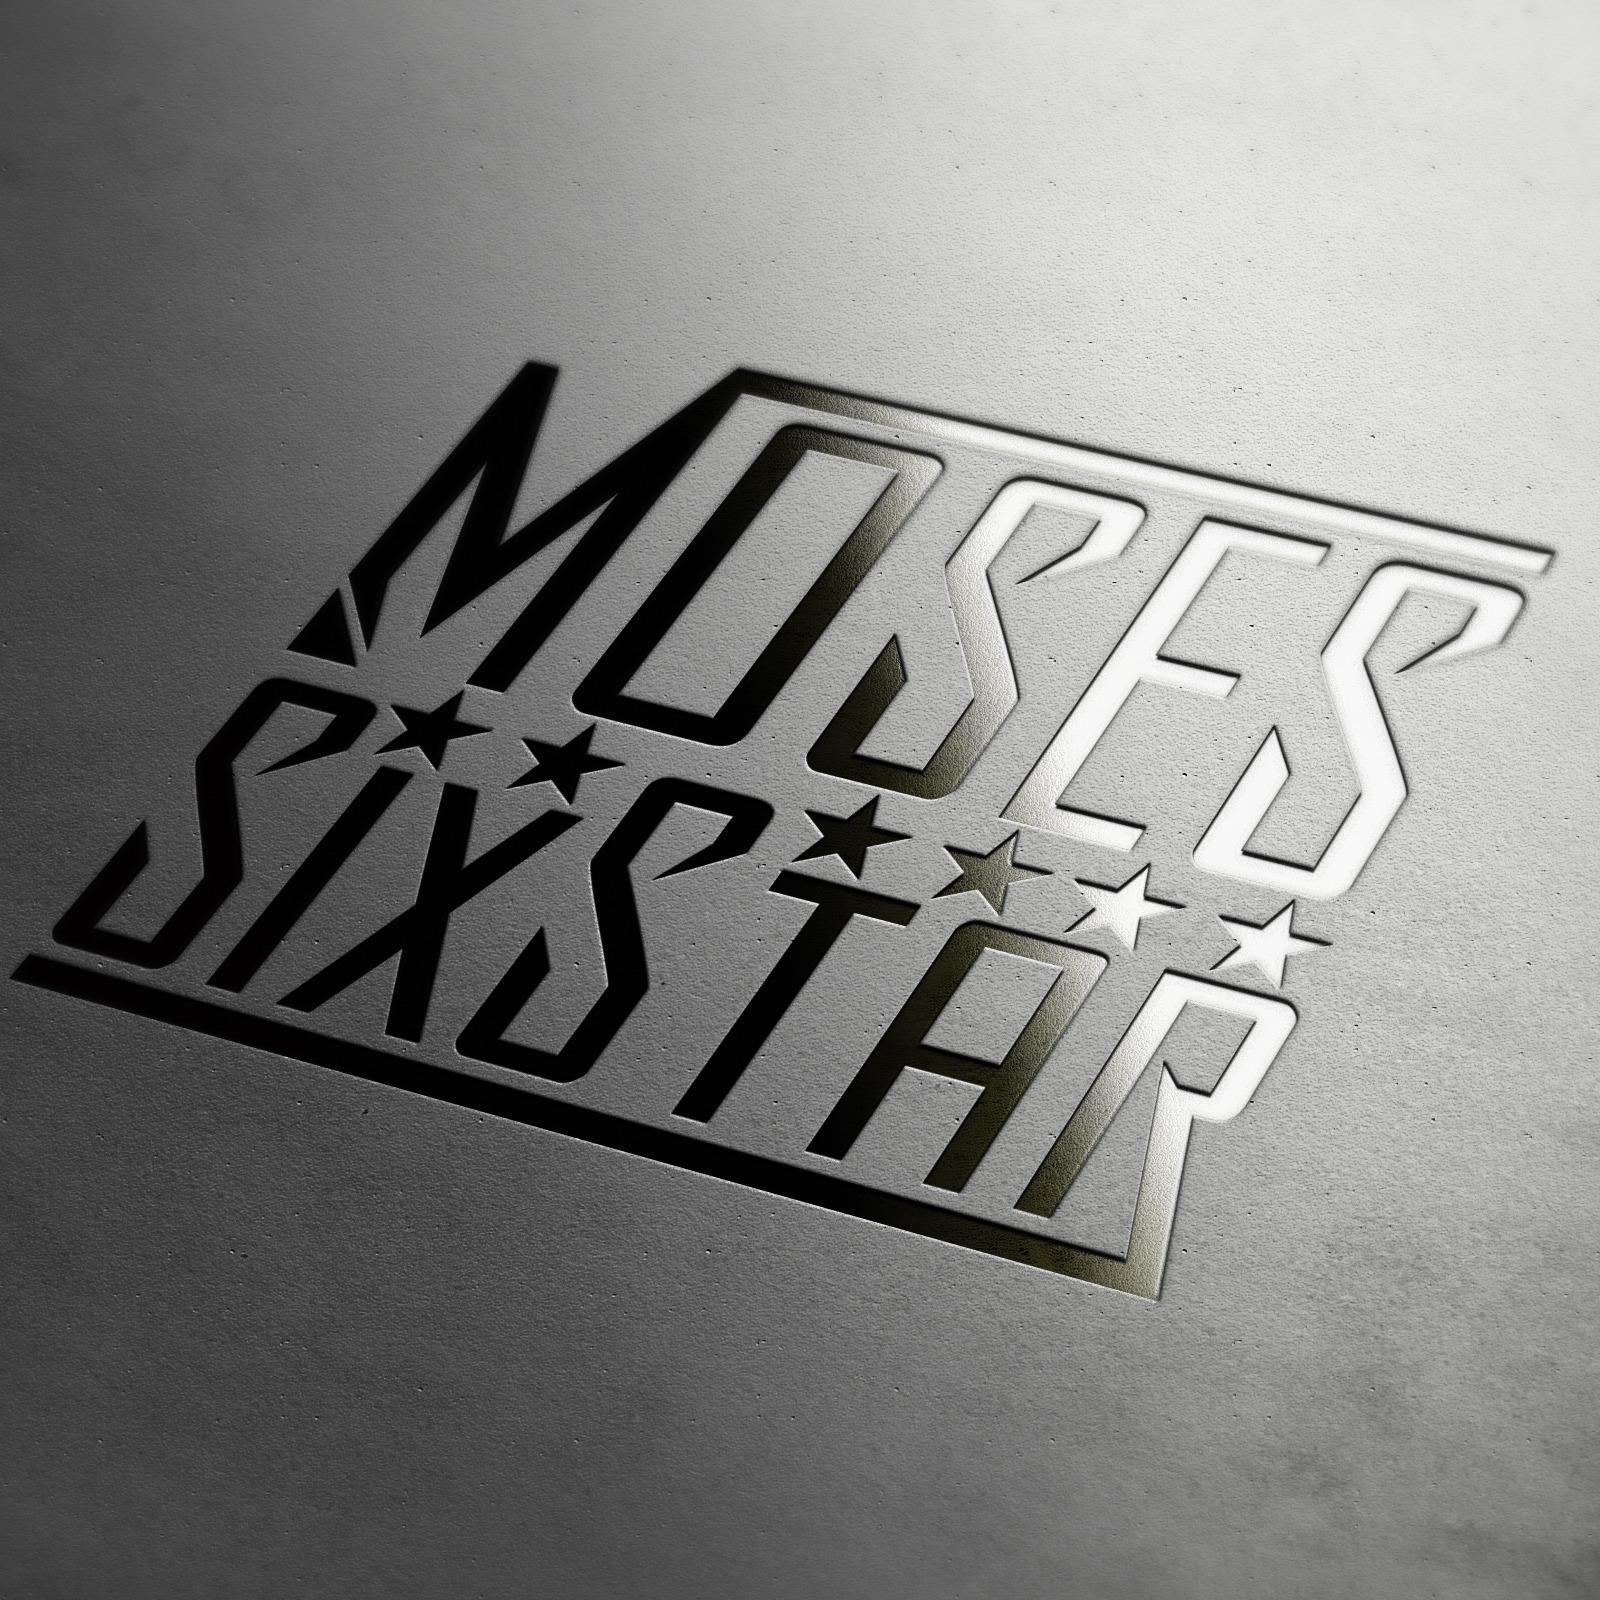 Moses SixStar's Podcast